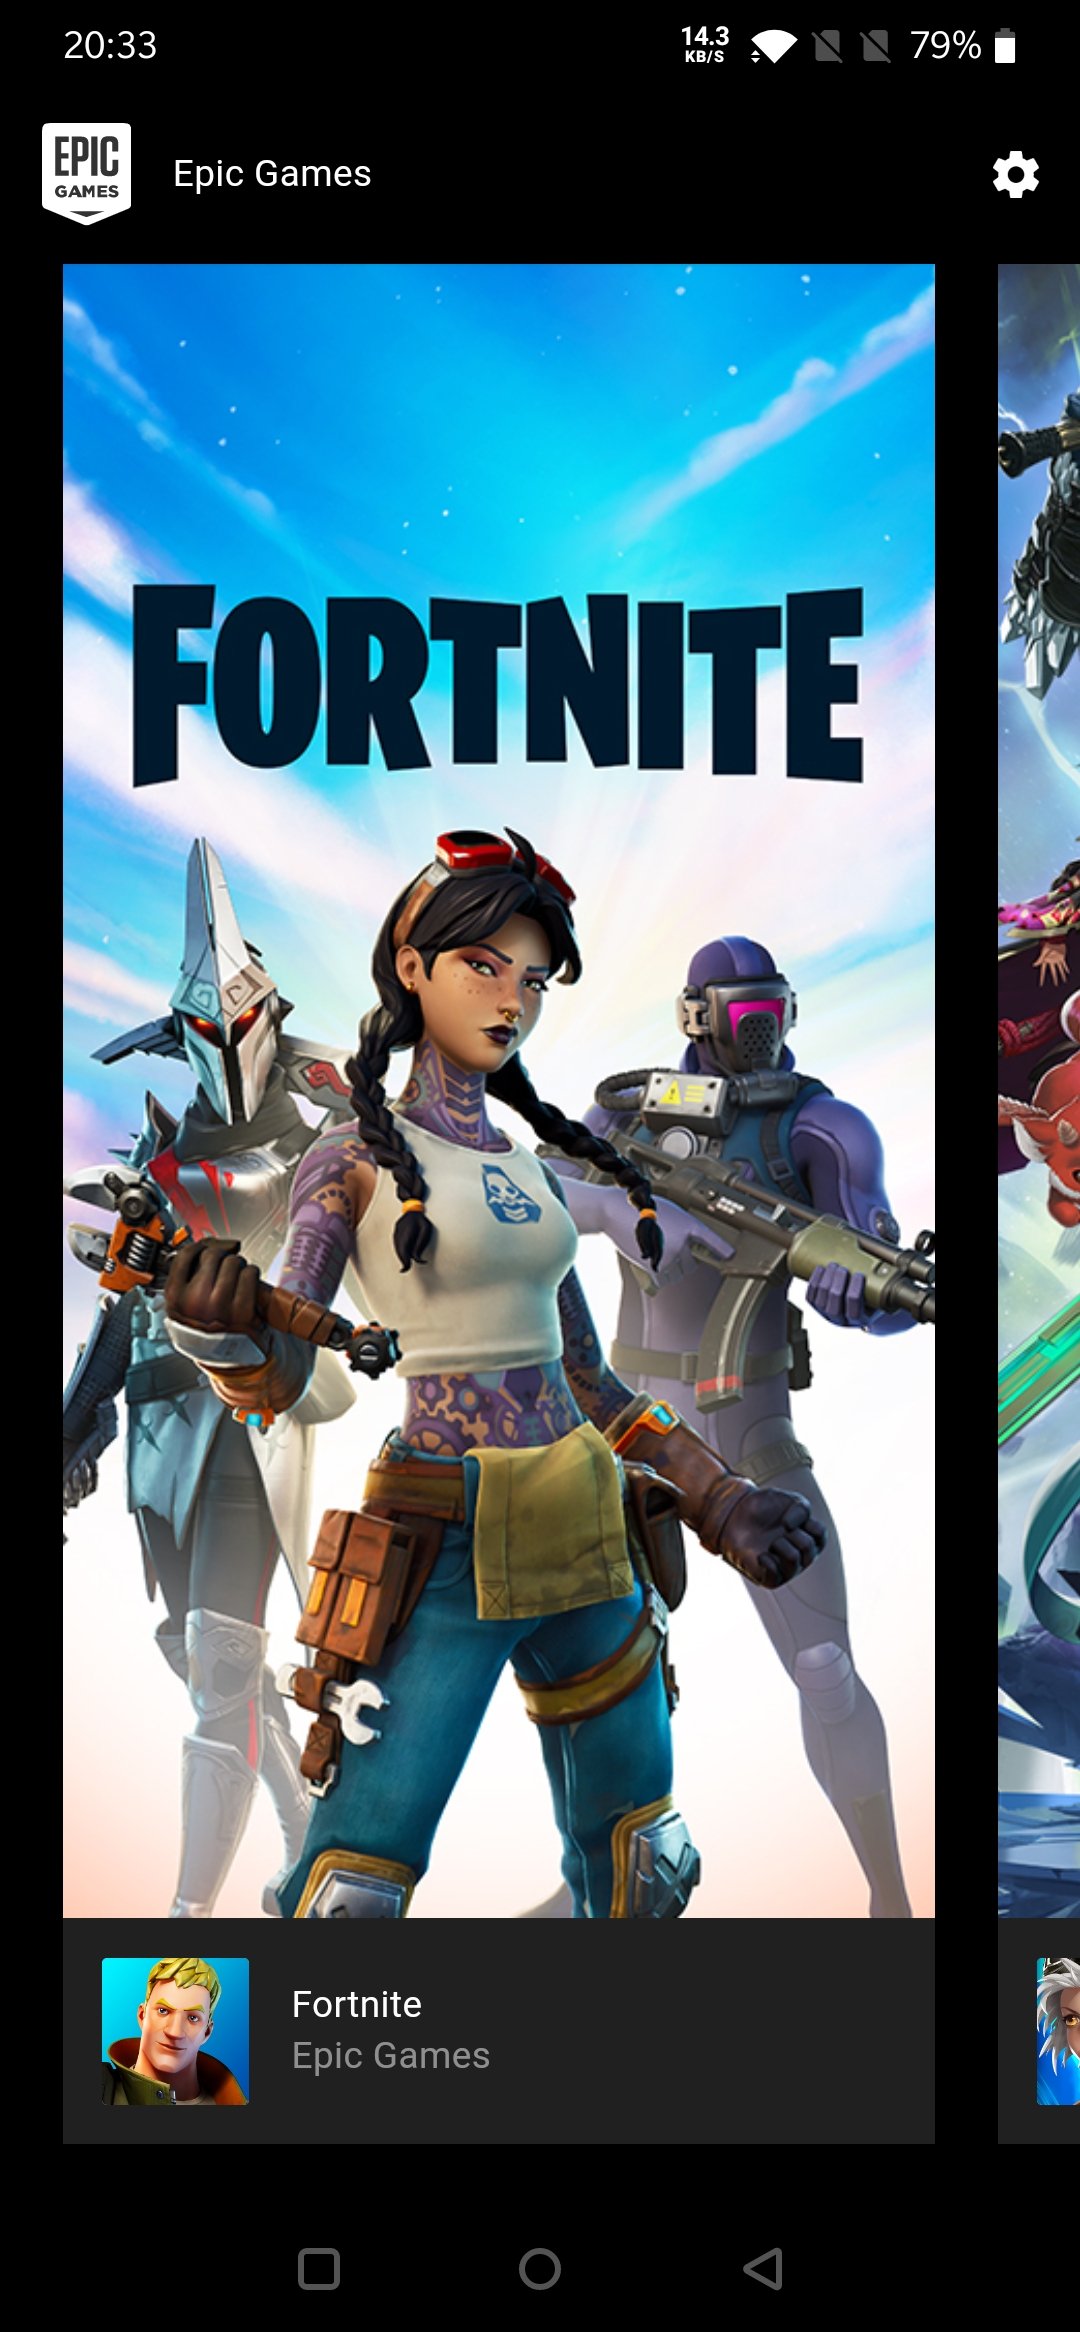 Epic Games: How to install Fortnite on Android smartphones